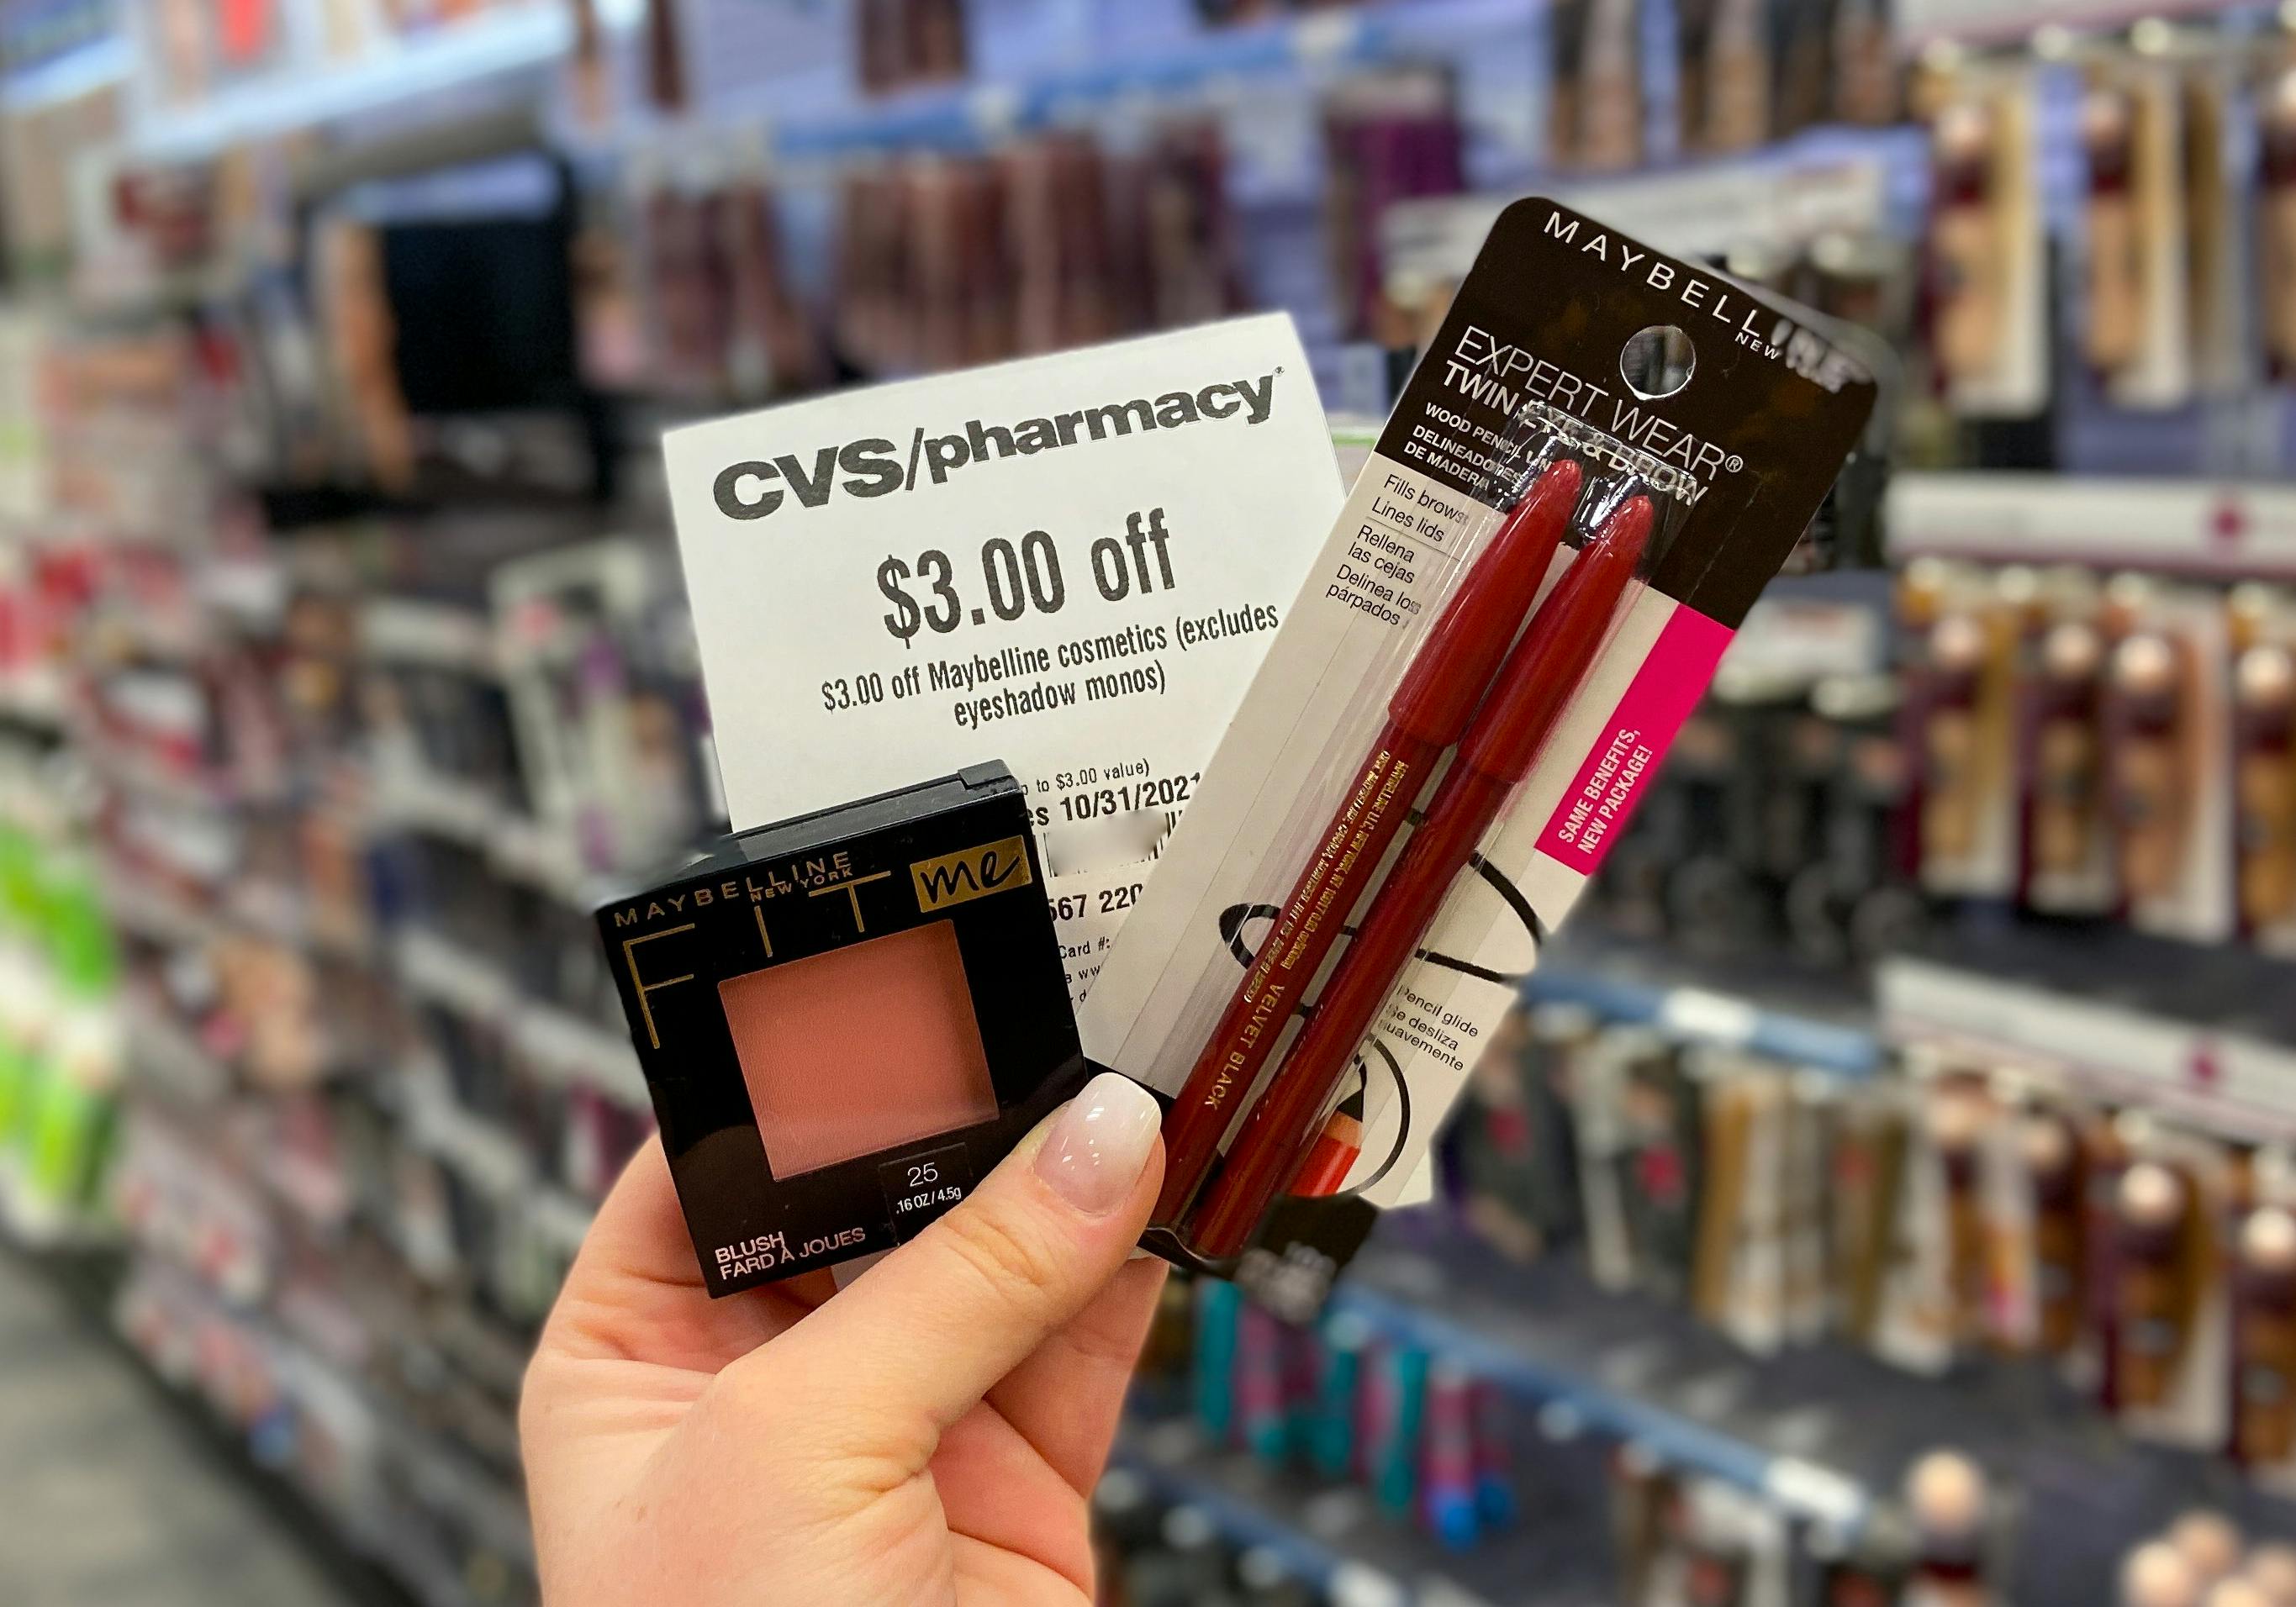 A person's hand holding up Maybelline makeup products with a coupon for $3 off at CVS.